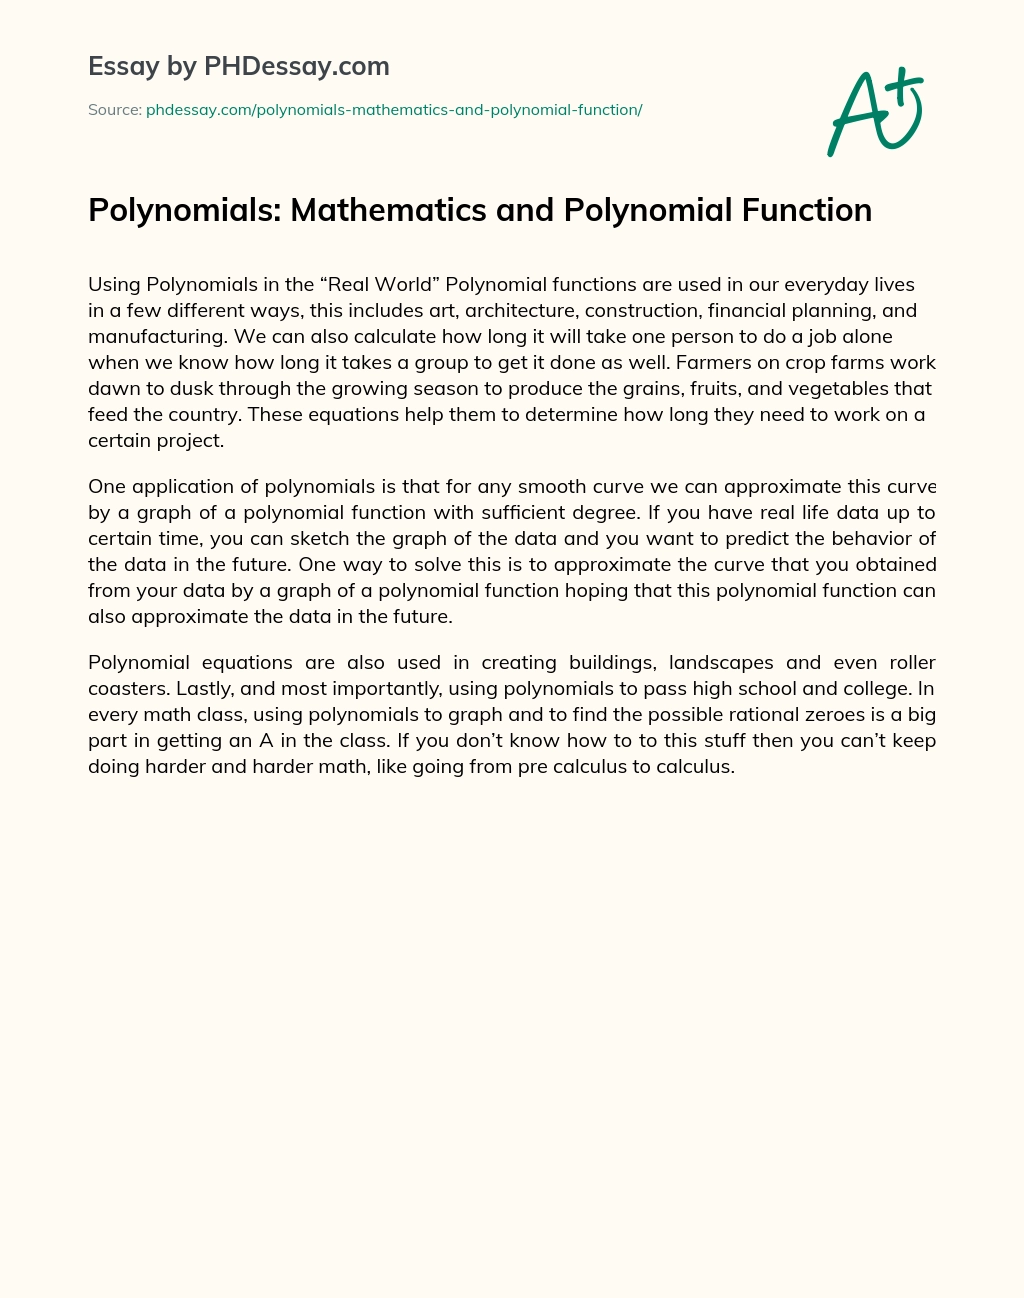 Polynomials: Mathematics and Polynomial Function essay